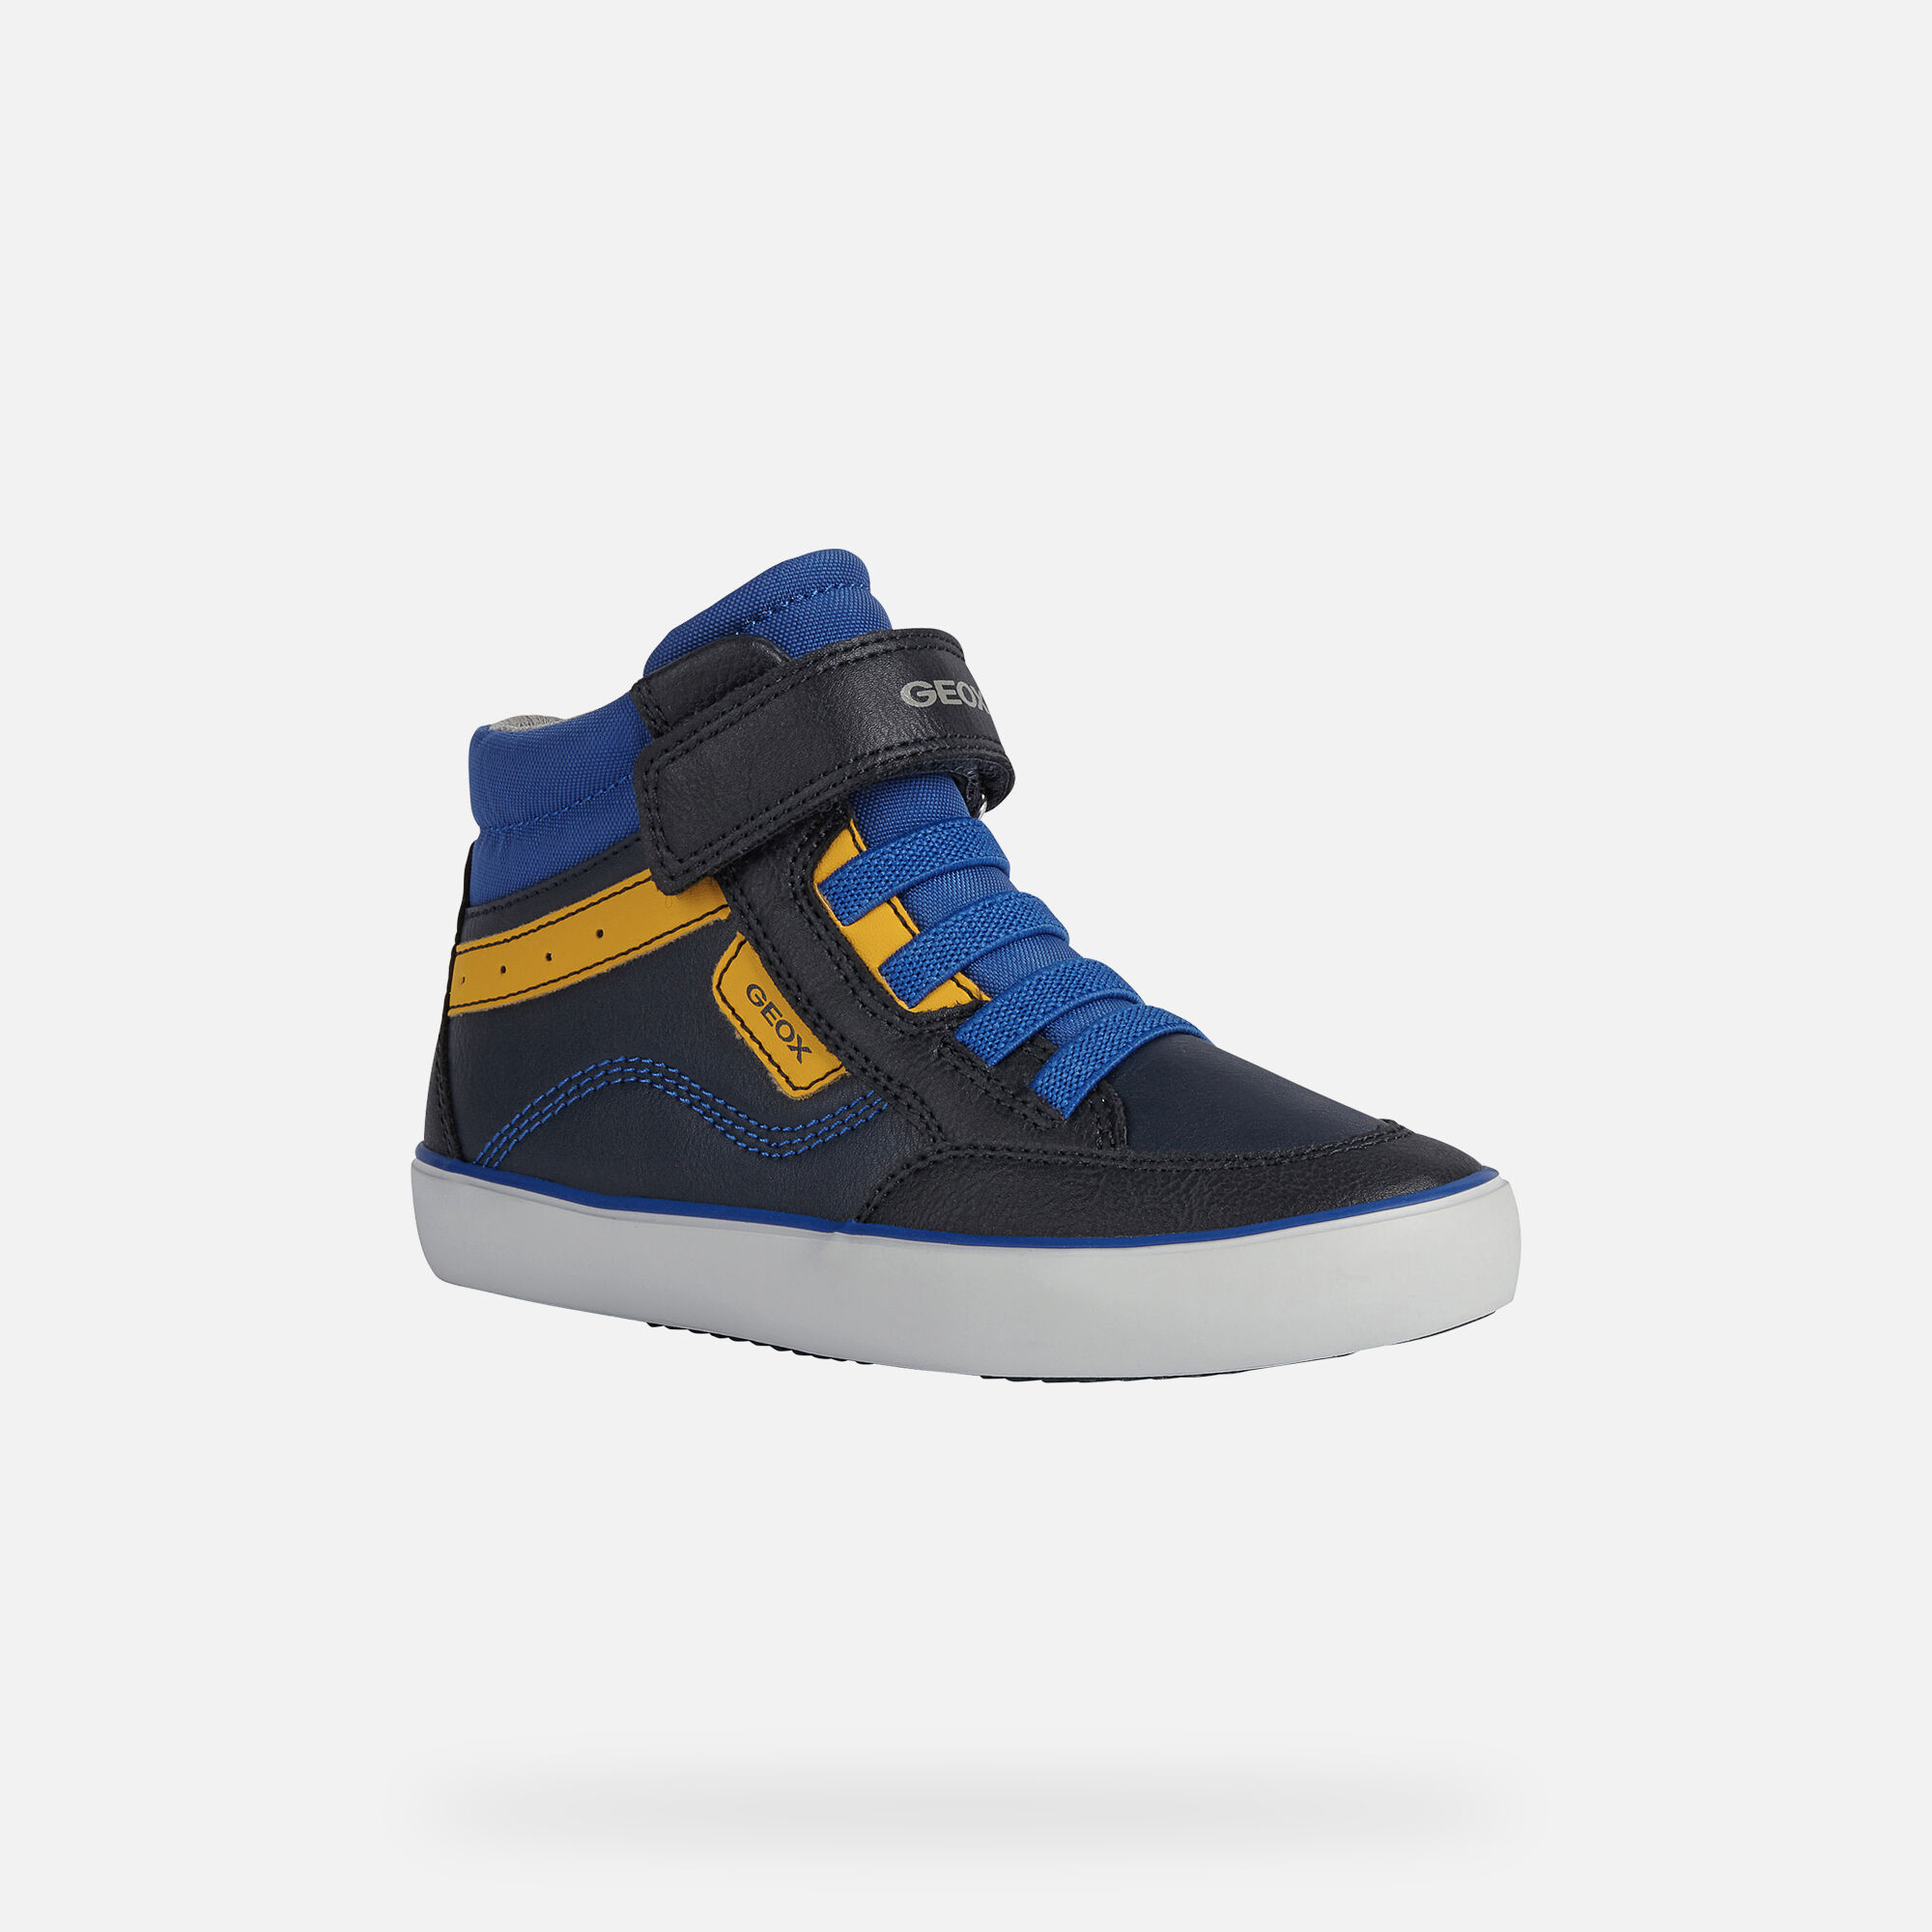 navy blue and yellow sneakers